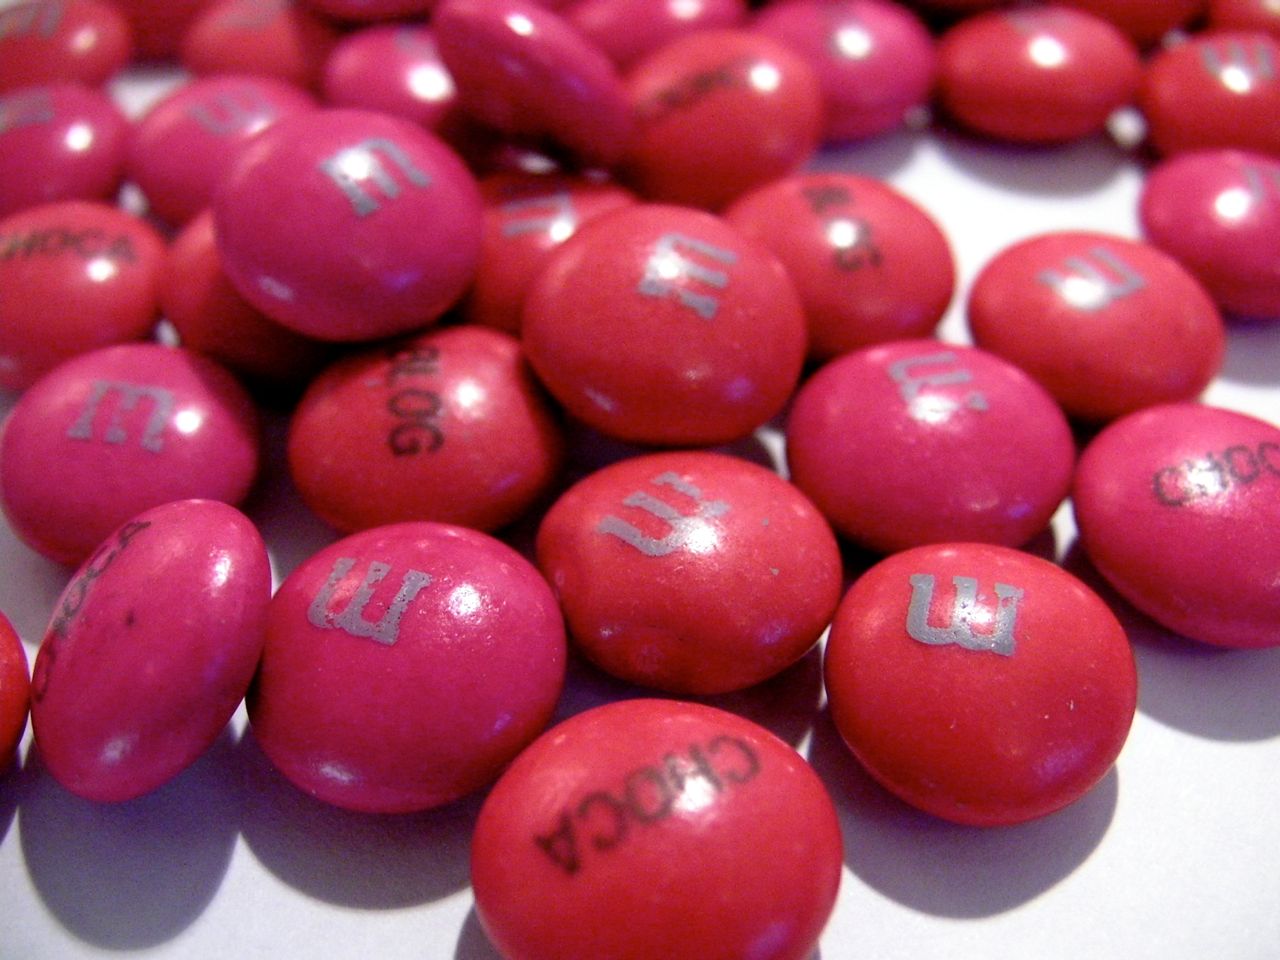 Personalized M&Ms Make the Most Fun Gifts - Popsicle Blog